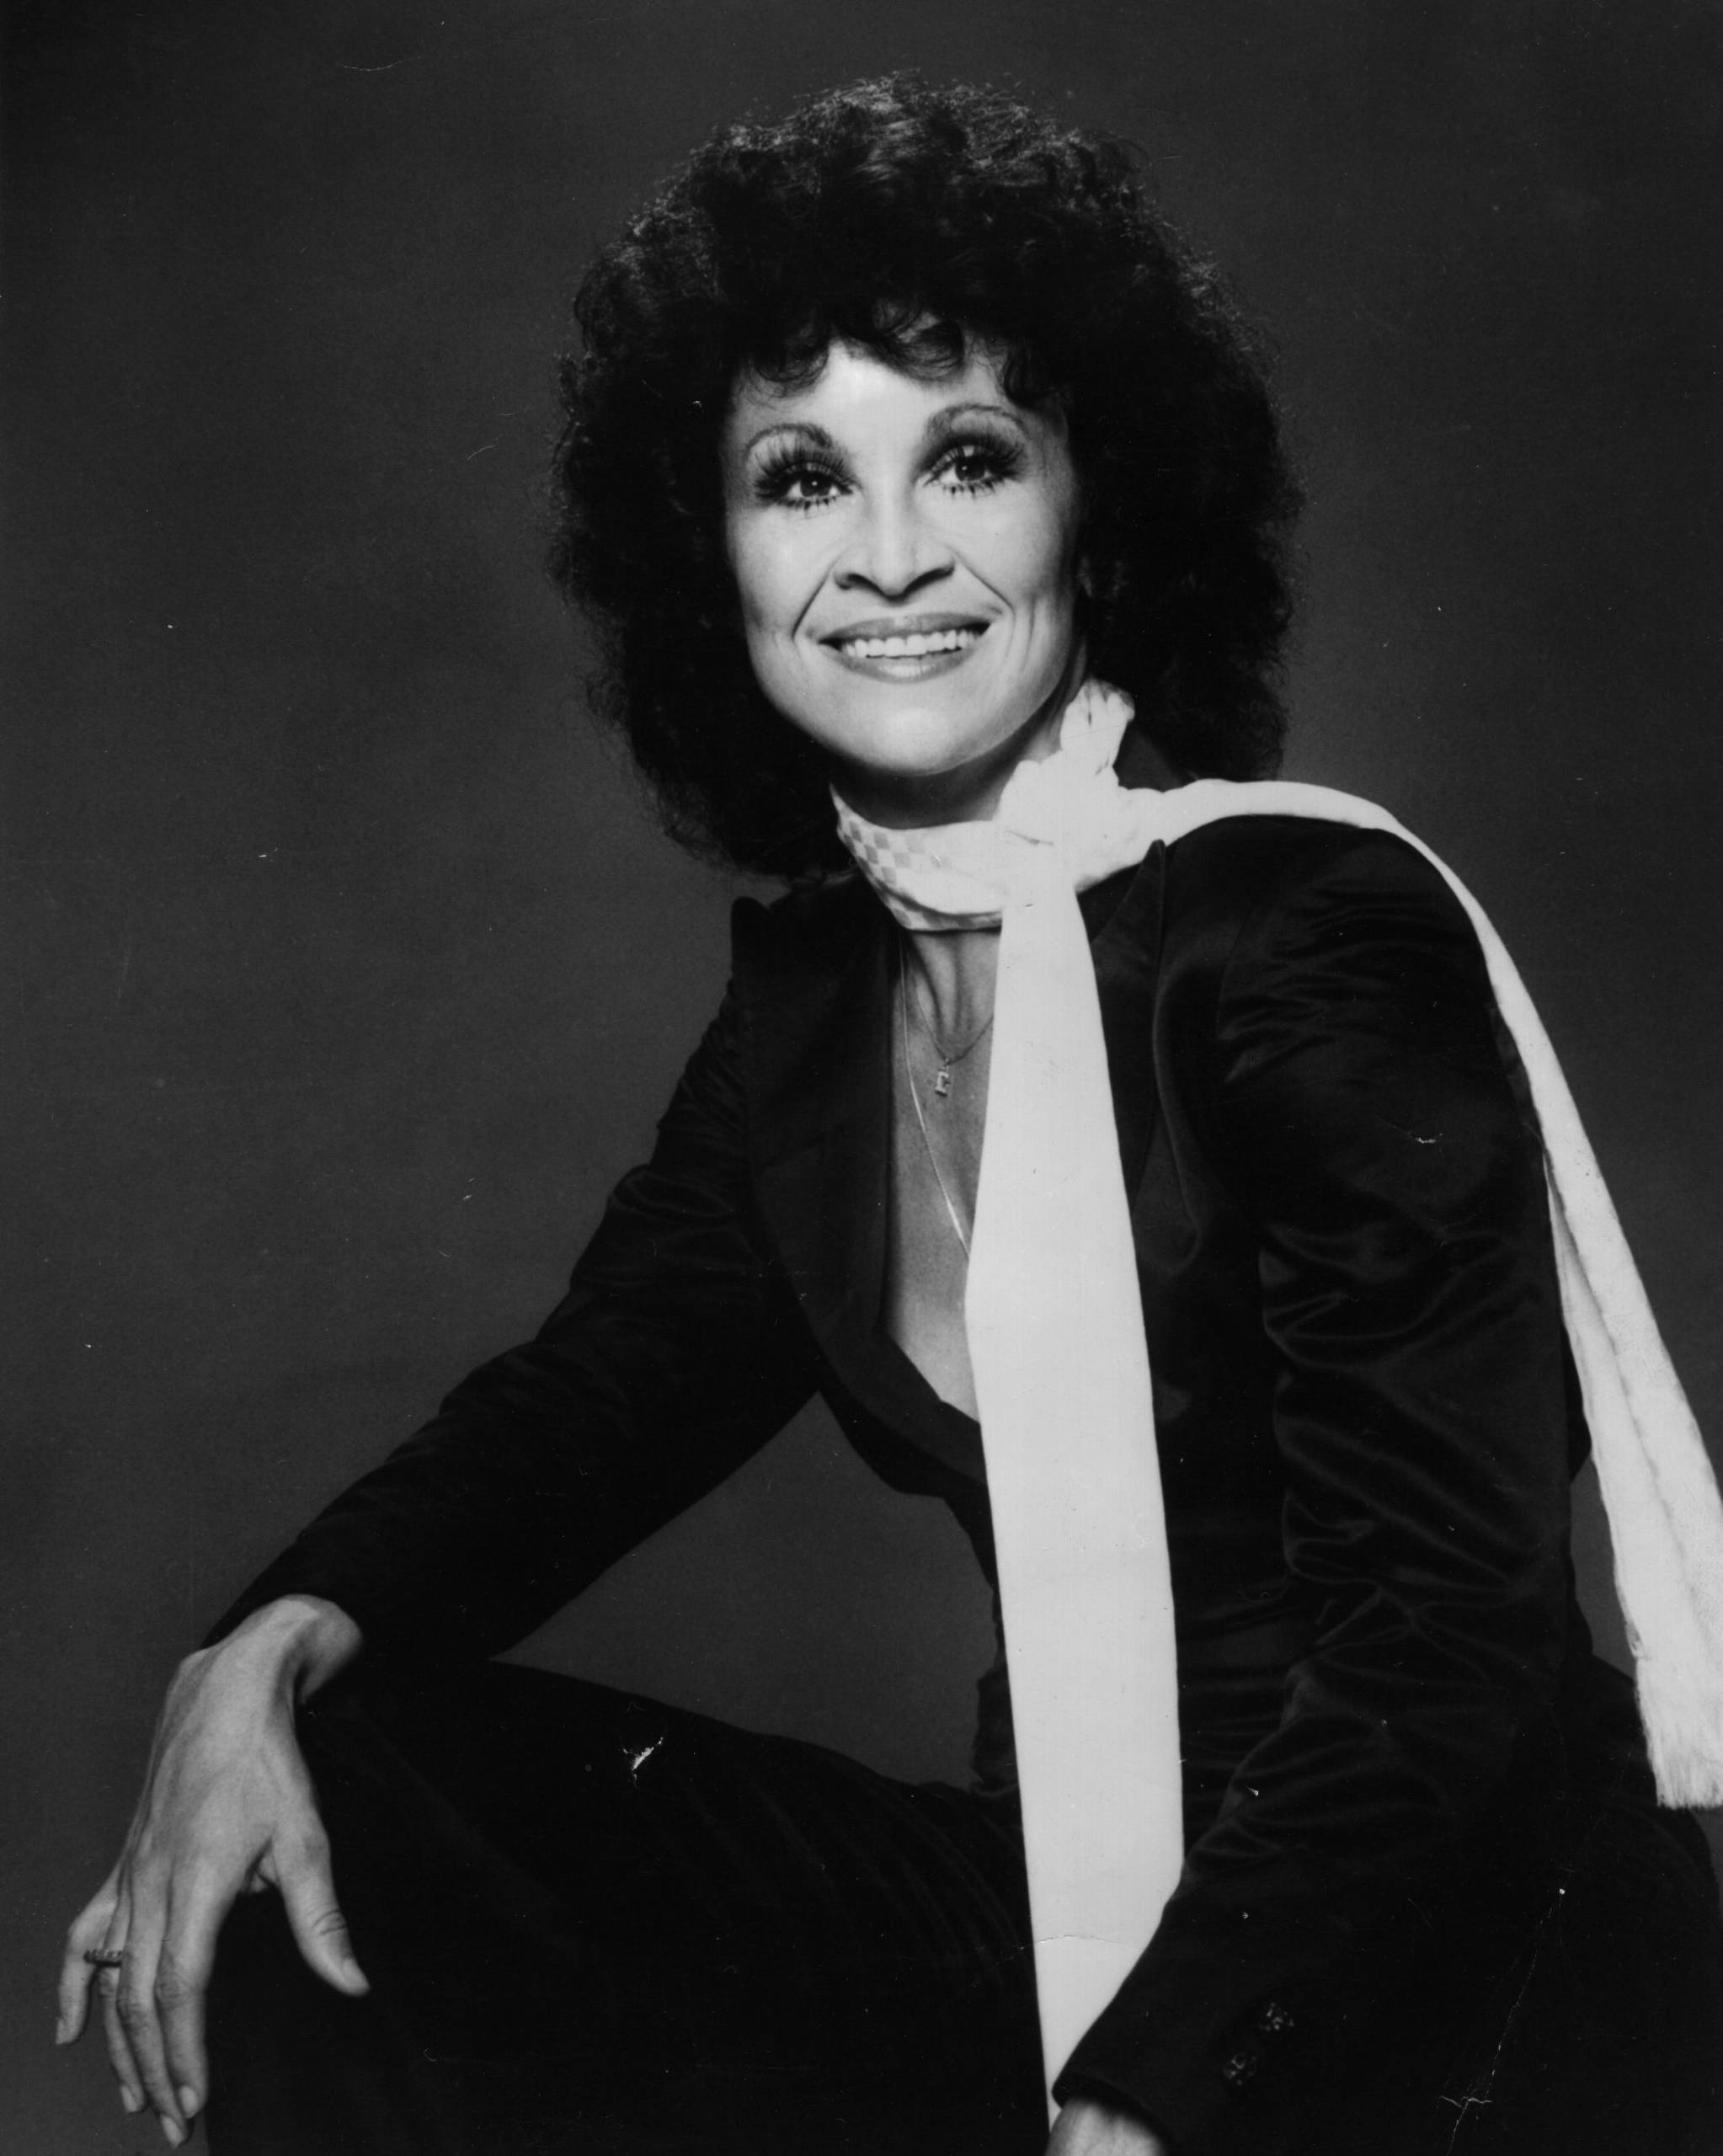 A smiling woman sits for a photographic portrait.